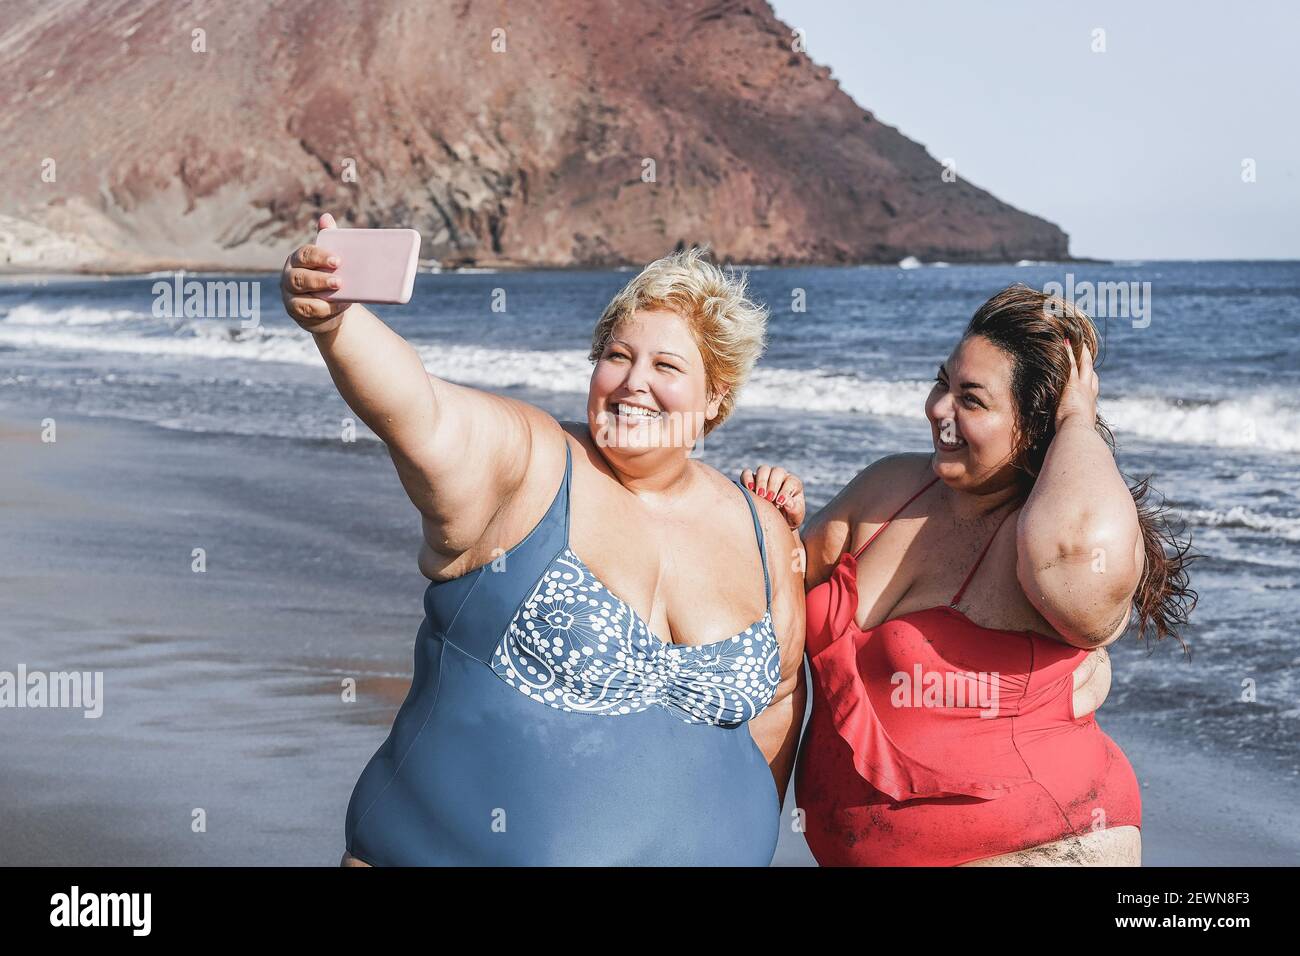 Curvy women friends taking selfie on the beach - Focus on faces Stock Photo